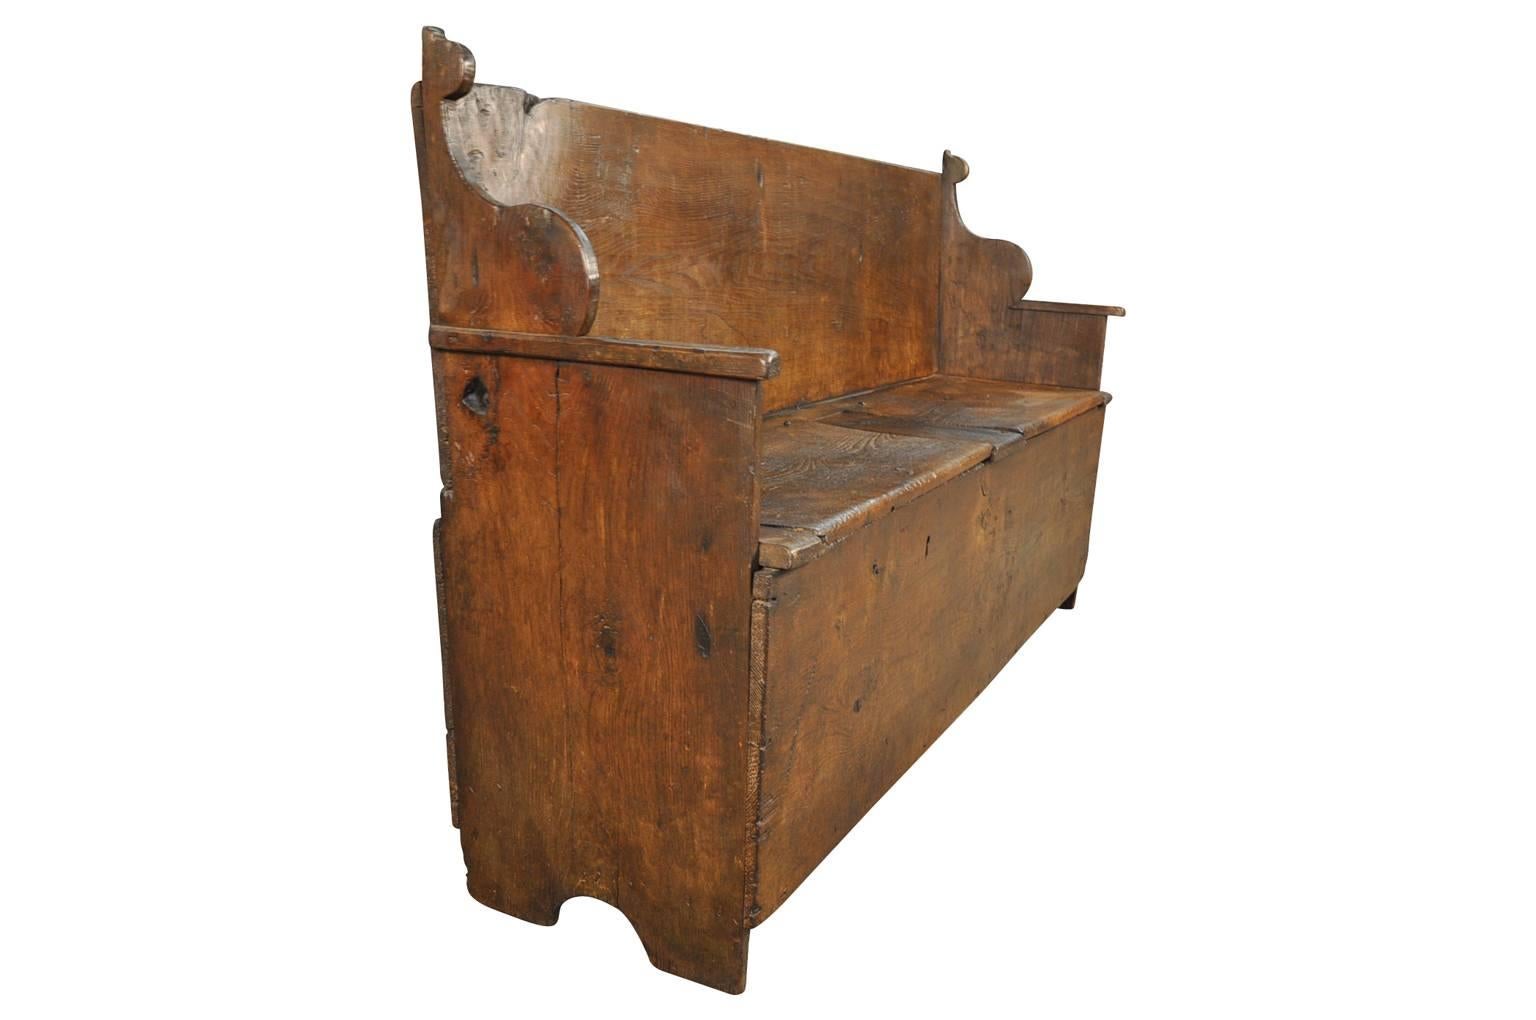 A fabulous mid-17th century bench. Trunk from the Piedmonte region of Northern Italy. Beautifully constructed from chestnut. Sensational patina - very rich and luminous.